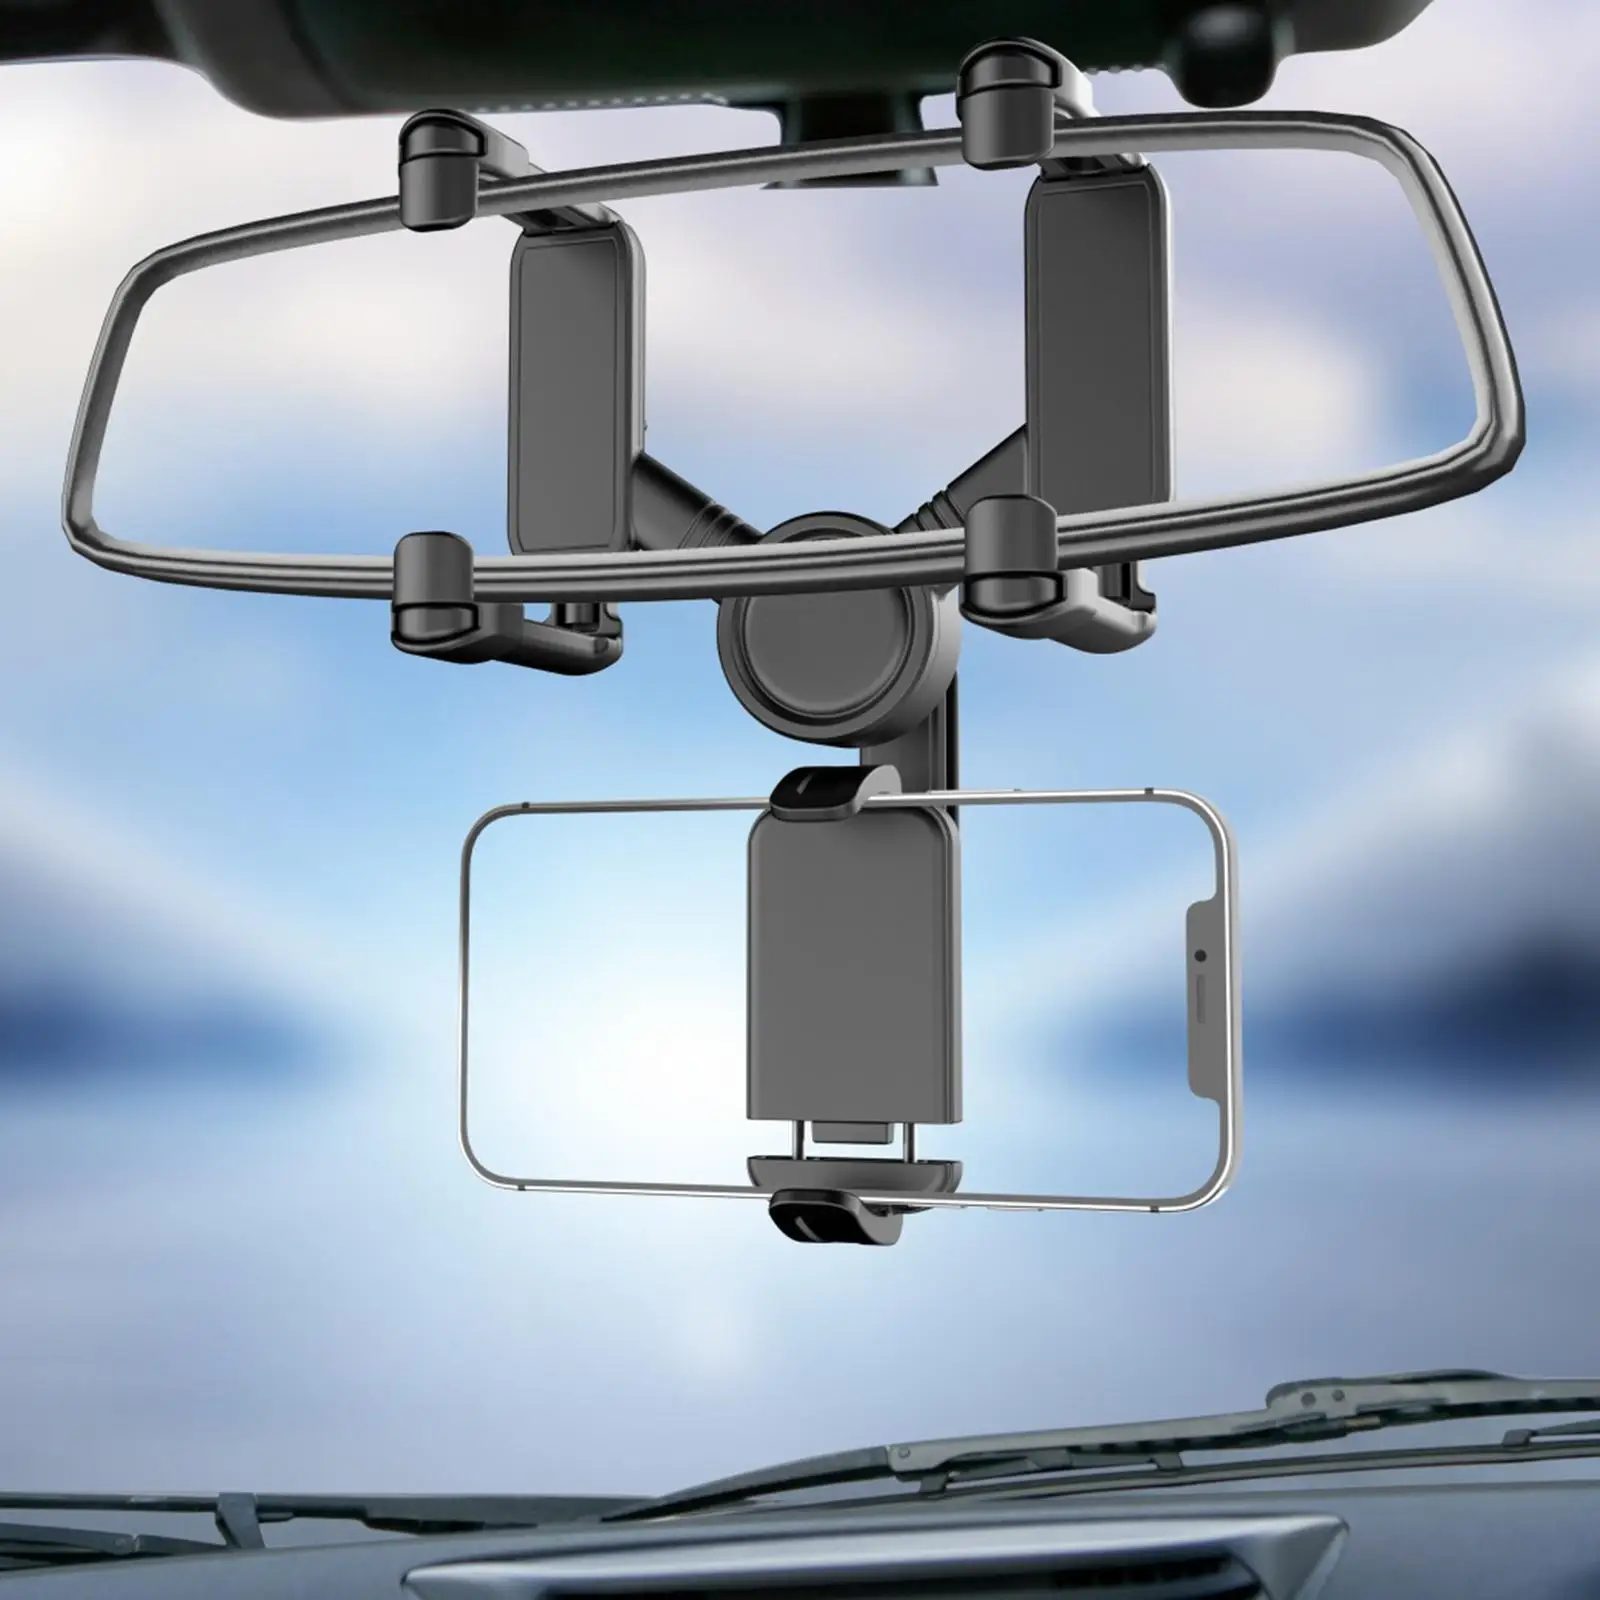   Phone Holder Mount 360 Degree Rotatable Fit for Smartphone